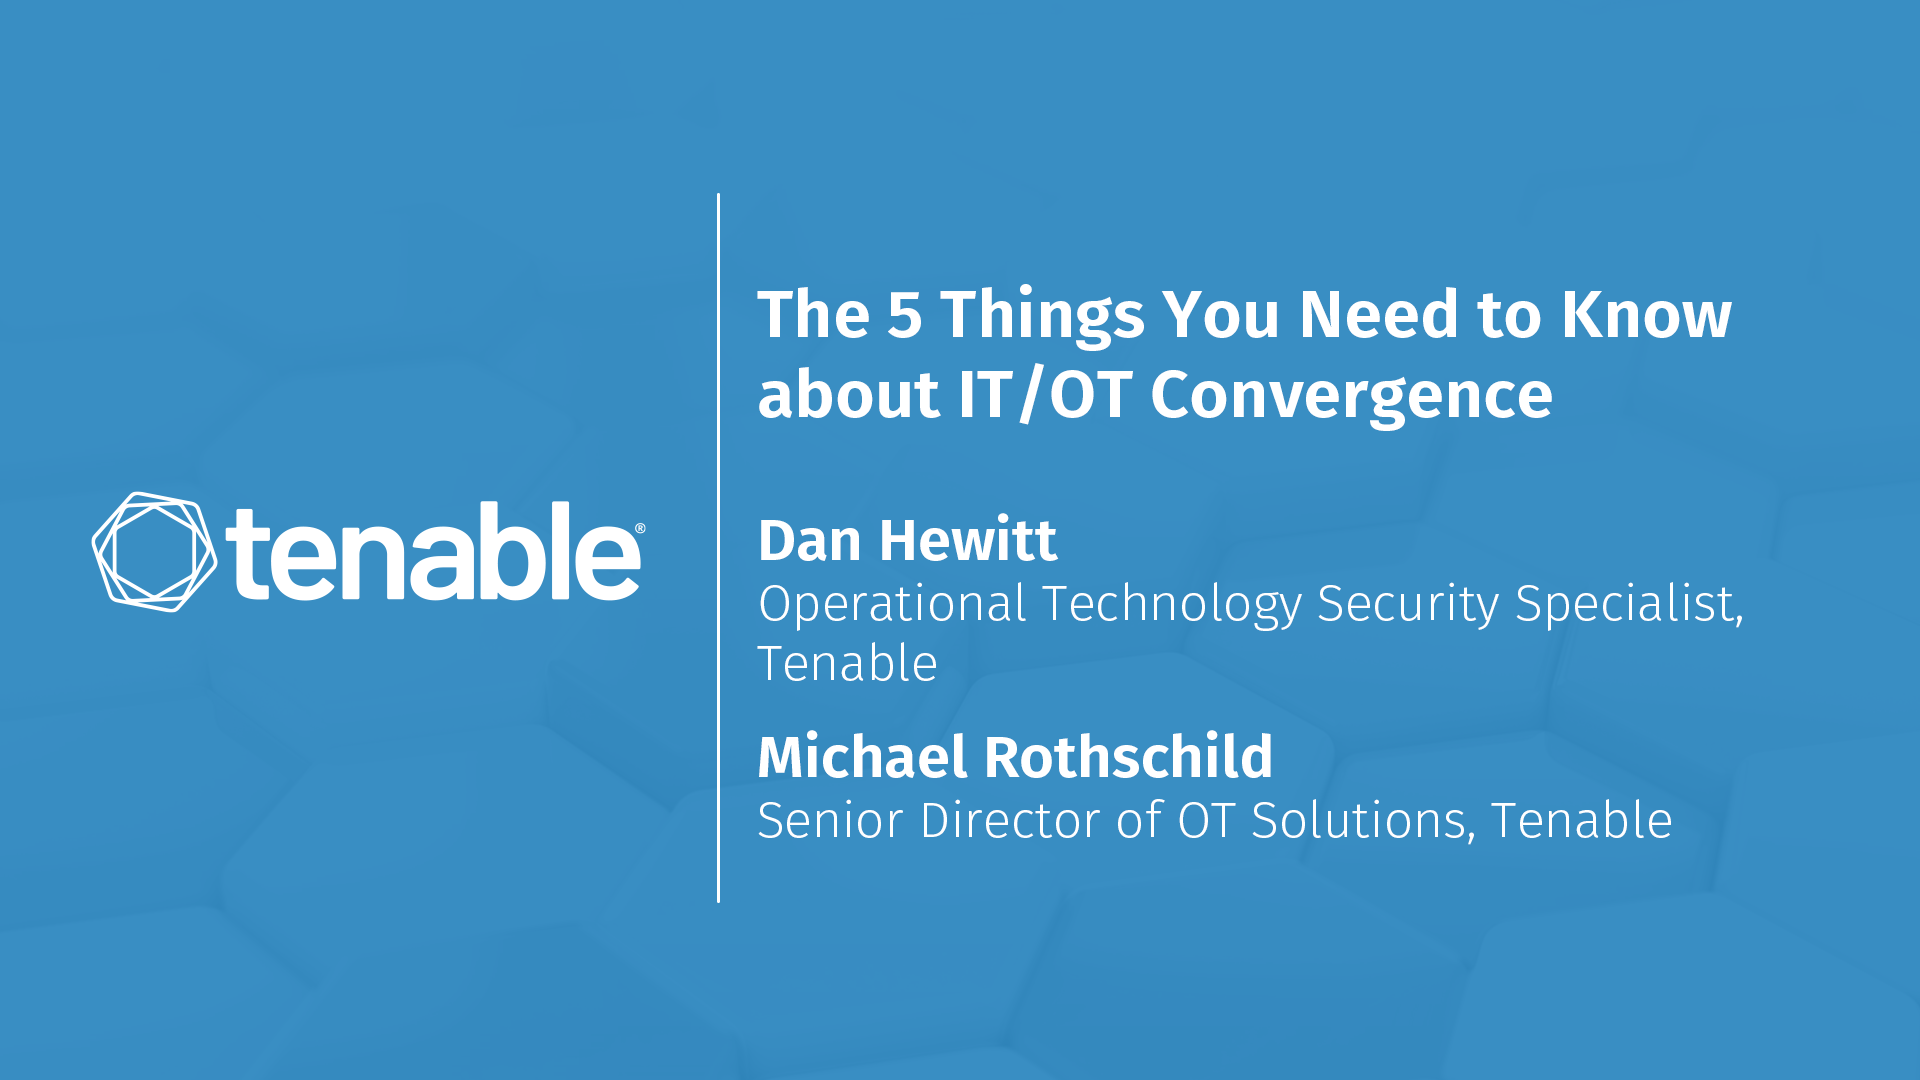 The 5 Things You Need to Know about IT/OT Convergence